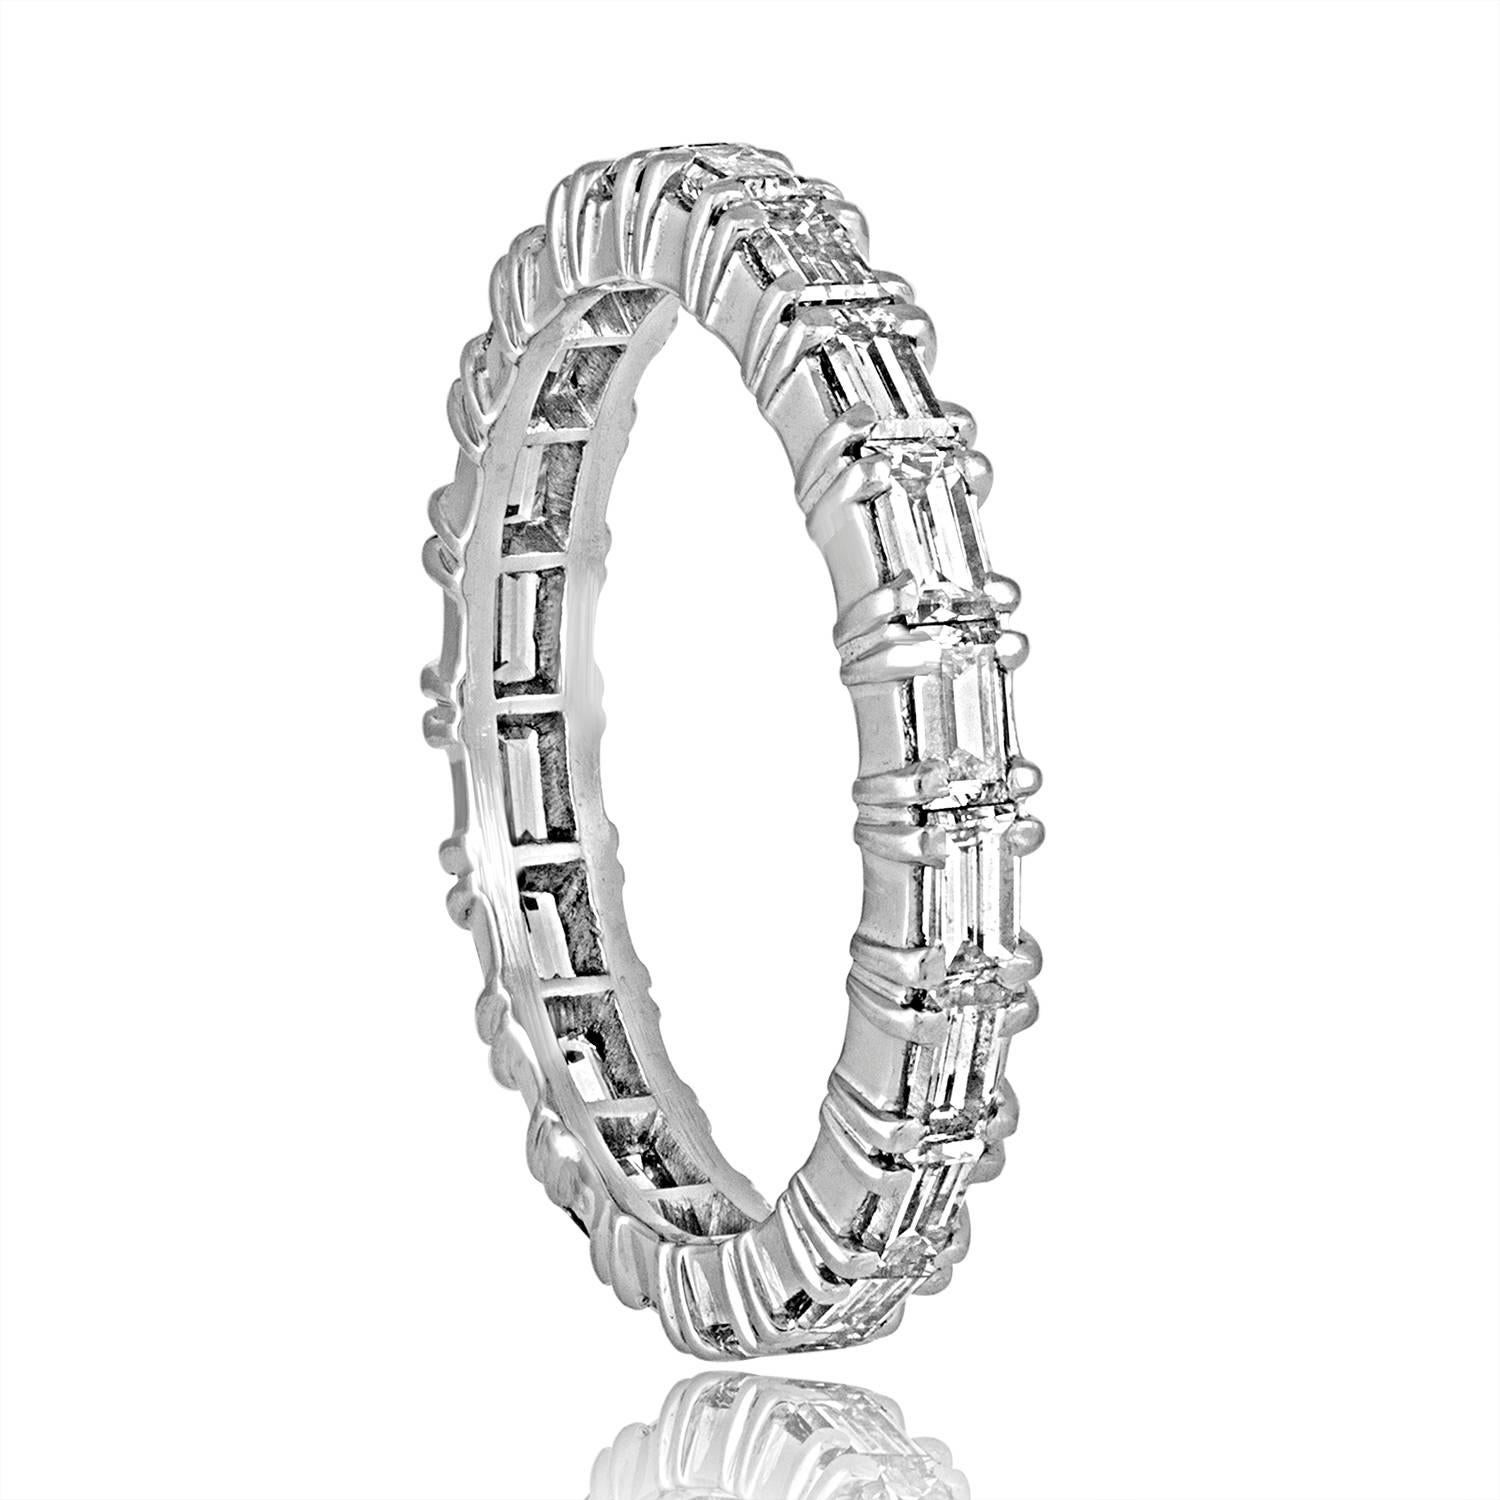 Eternity Baguette Diamond Band Ring
The ring is Platinum.
There are 2.00 Carats in Diamonds G/H VS/SI
The ring is a size 8.75, not sizable.
The ring weighs 4.7 grams.